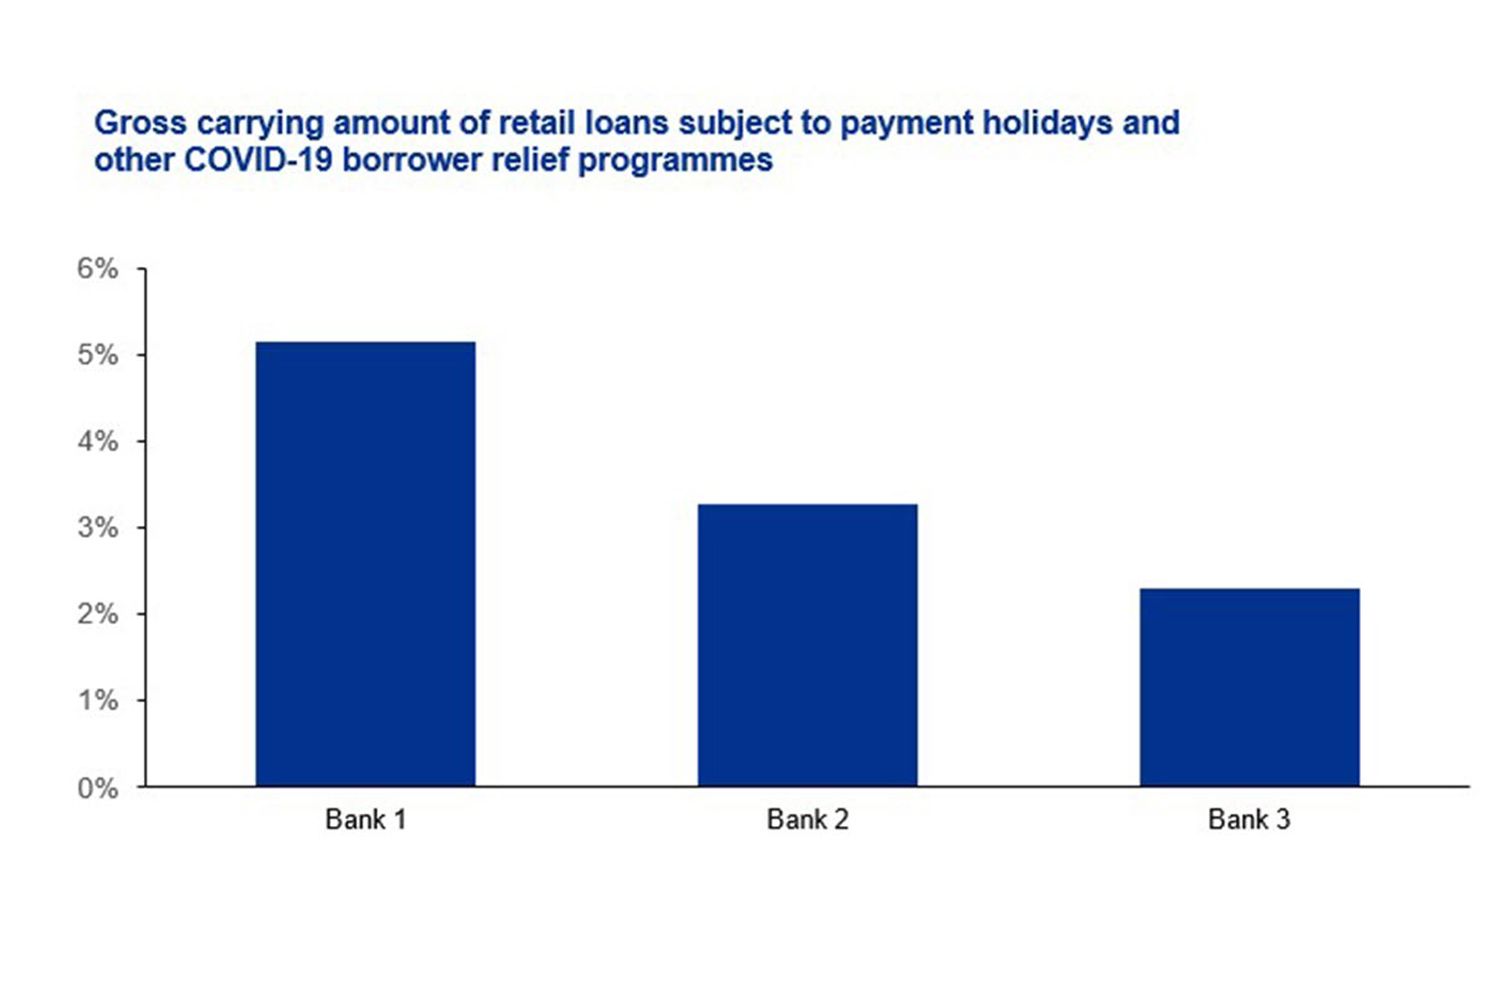 Gross carrying amount of retail loans subject to payment holidays